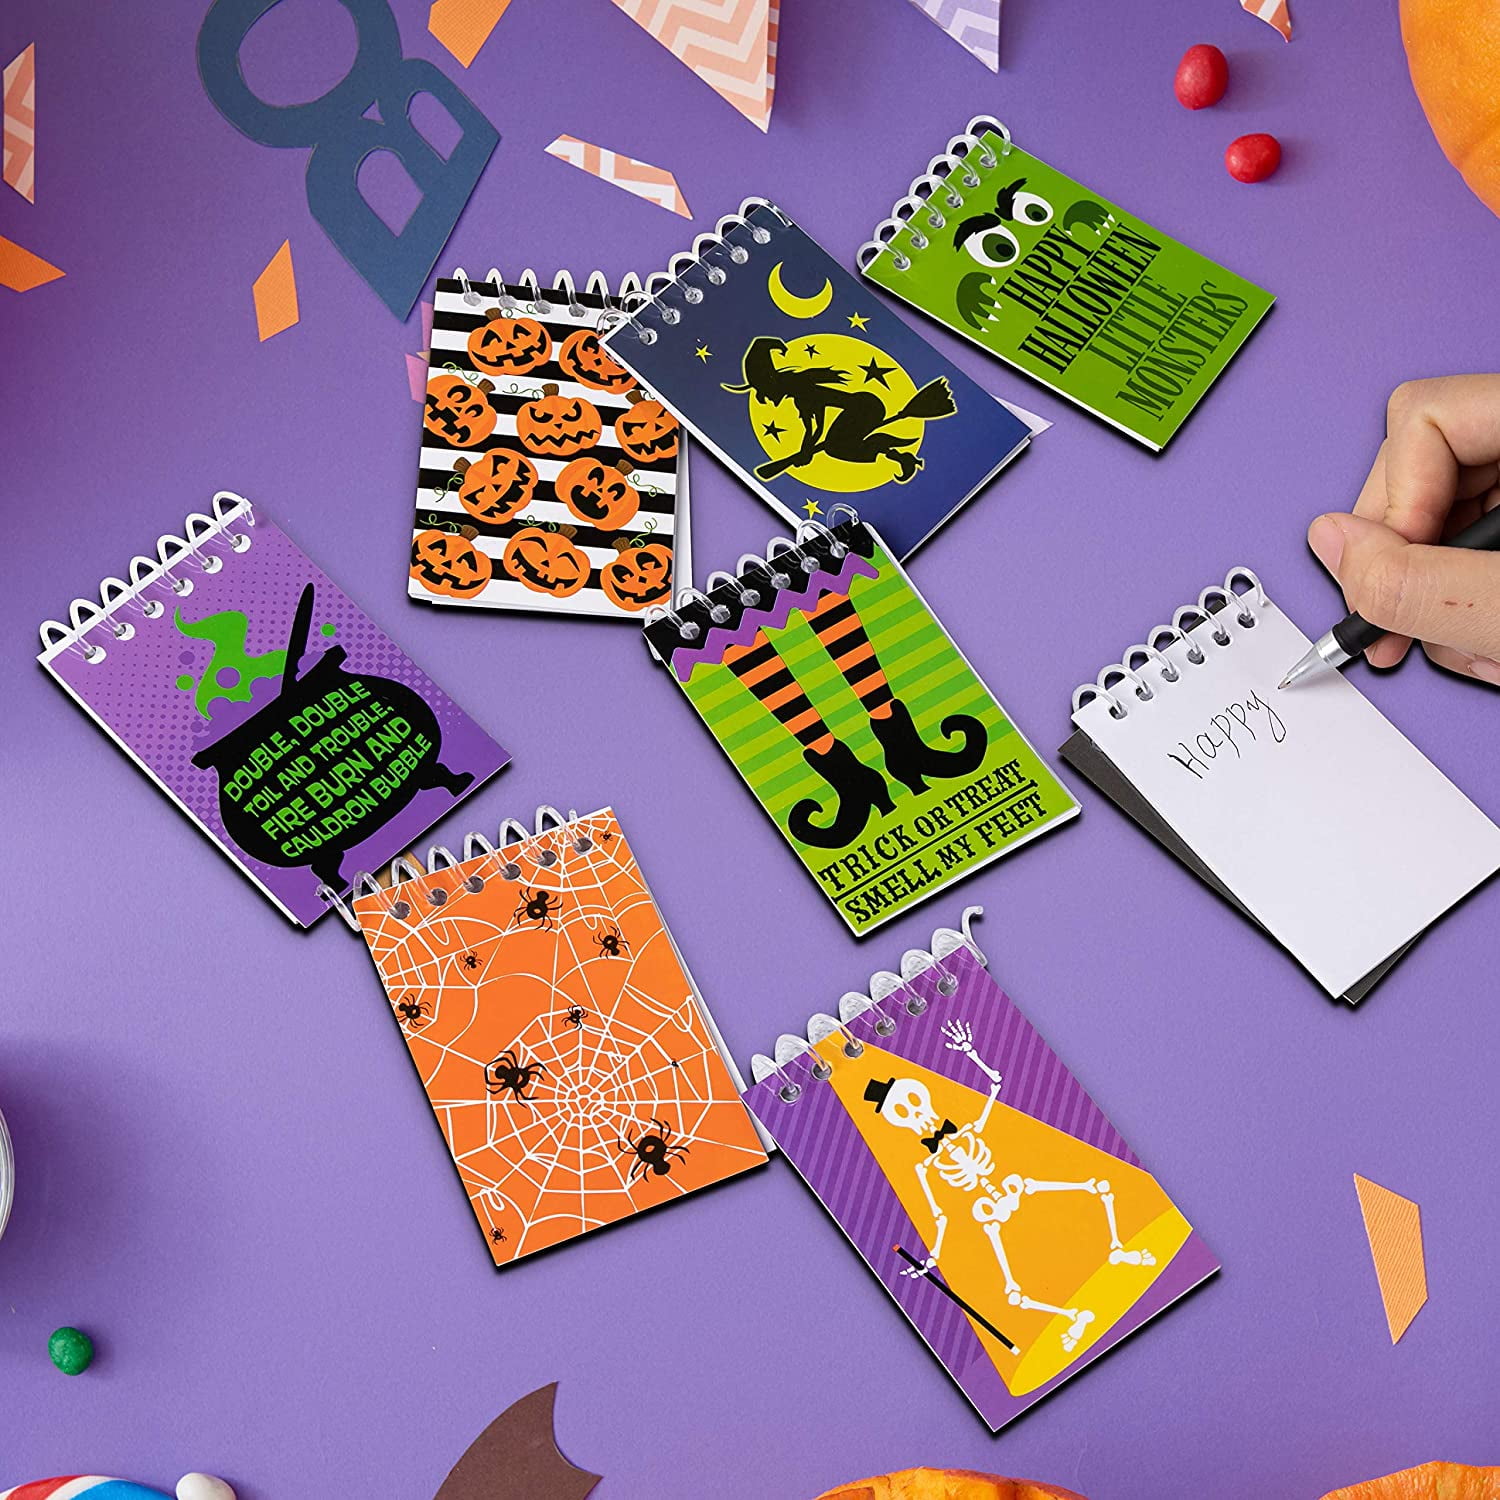 Removable Memo Notes in 8 Patterns 320 Pieces Halloween Spooky Notepad Mini Cartoon Sticky Notes Trick or Treat Presents for Kids Halloween Party Favors 